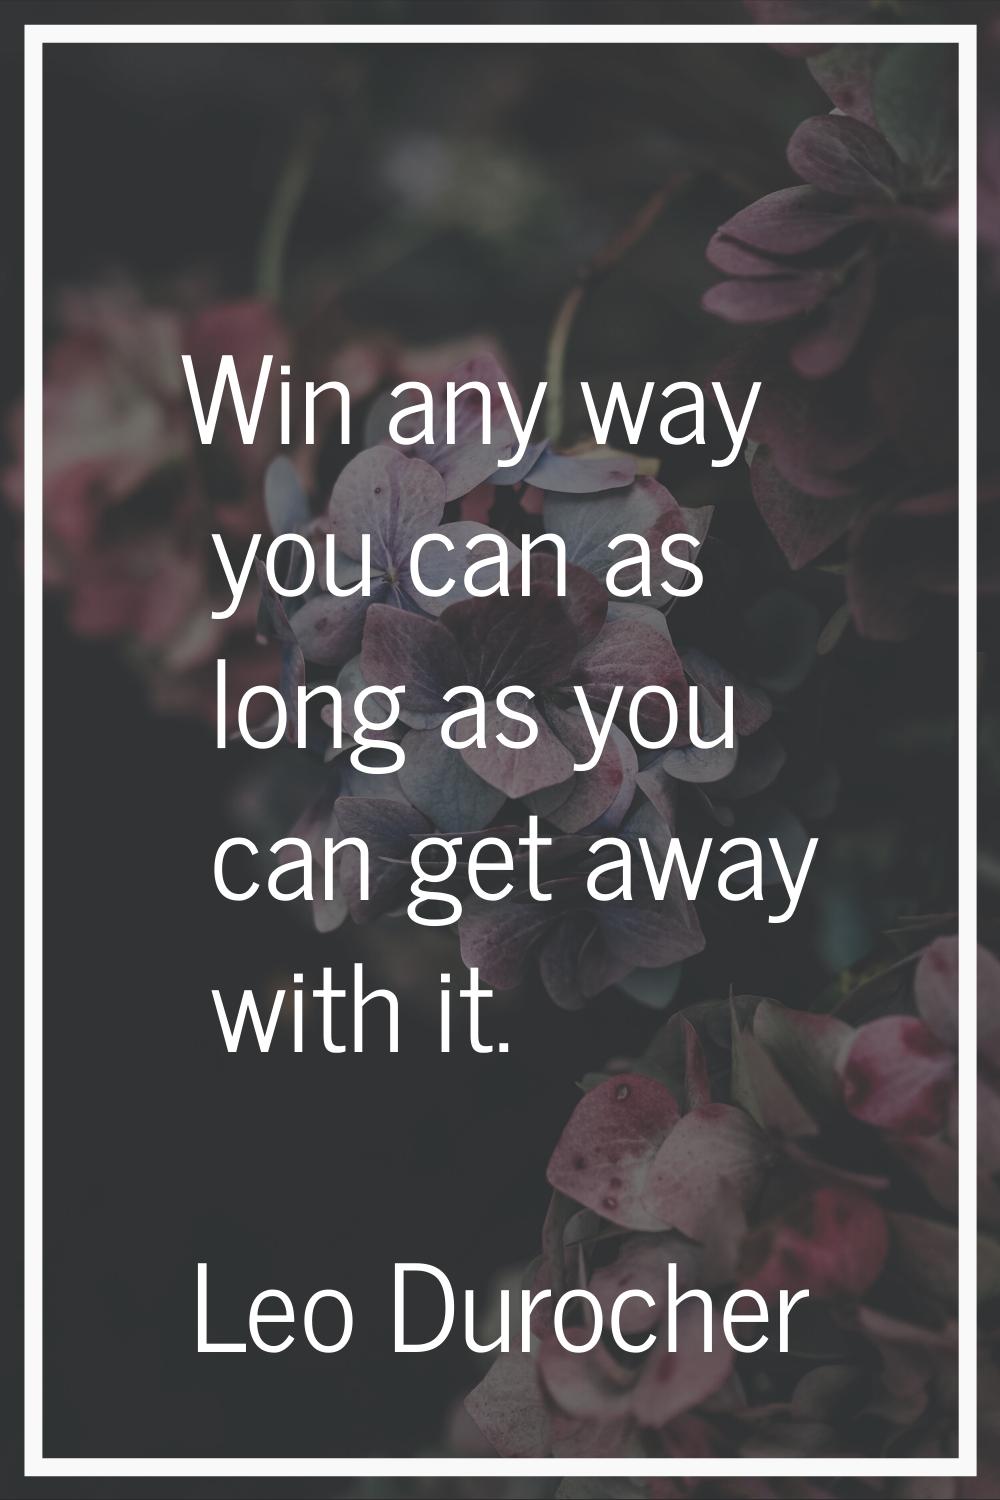 Win any way you can as long as you can get away with it.